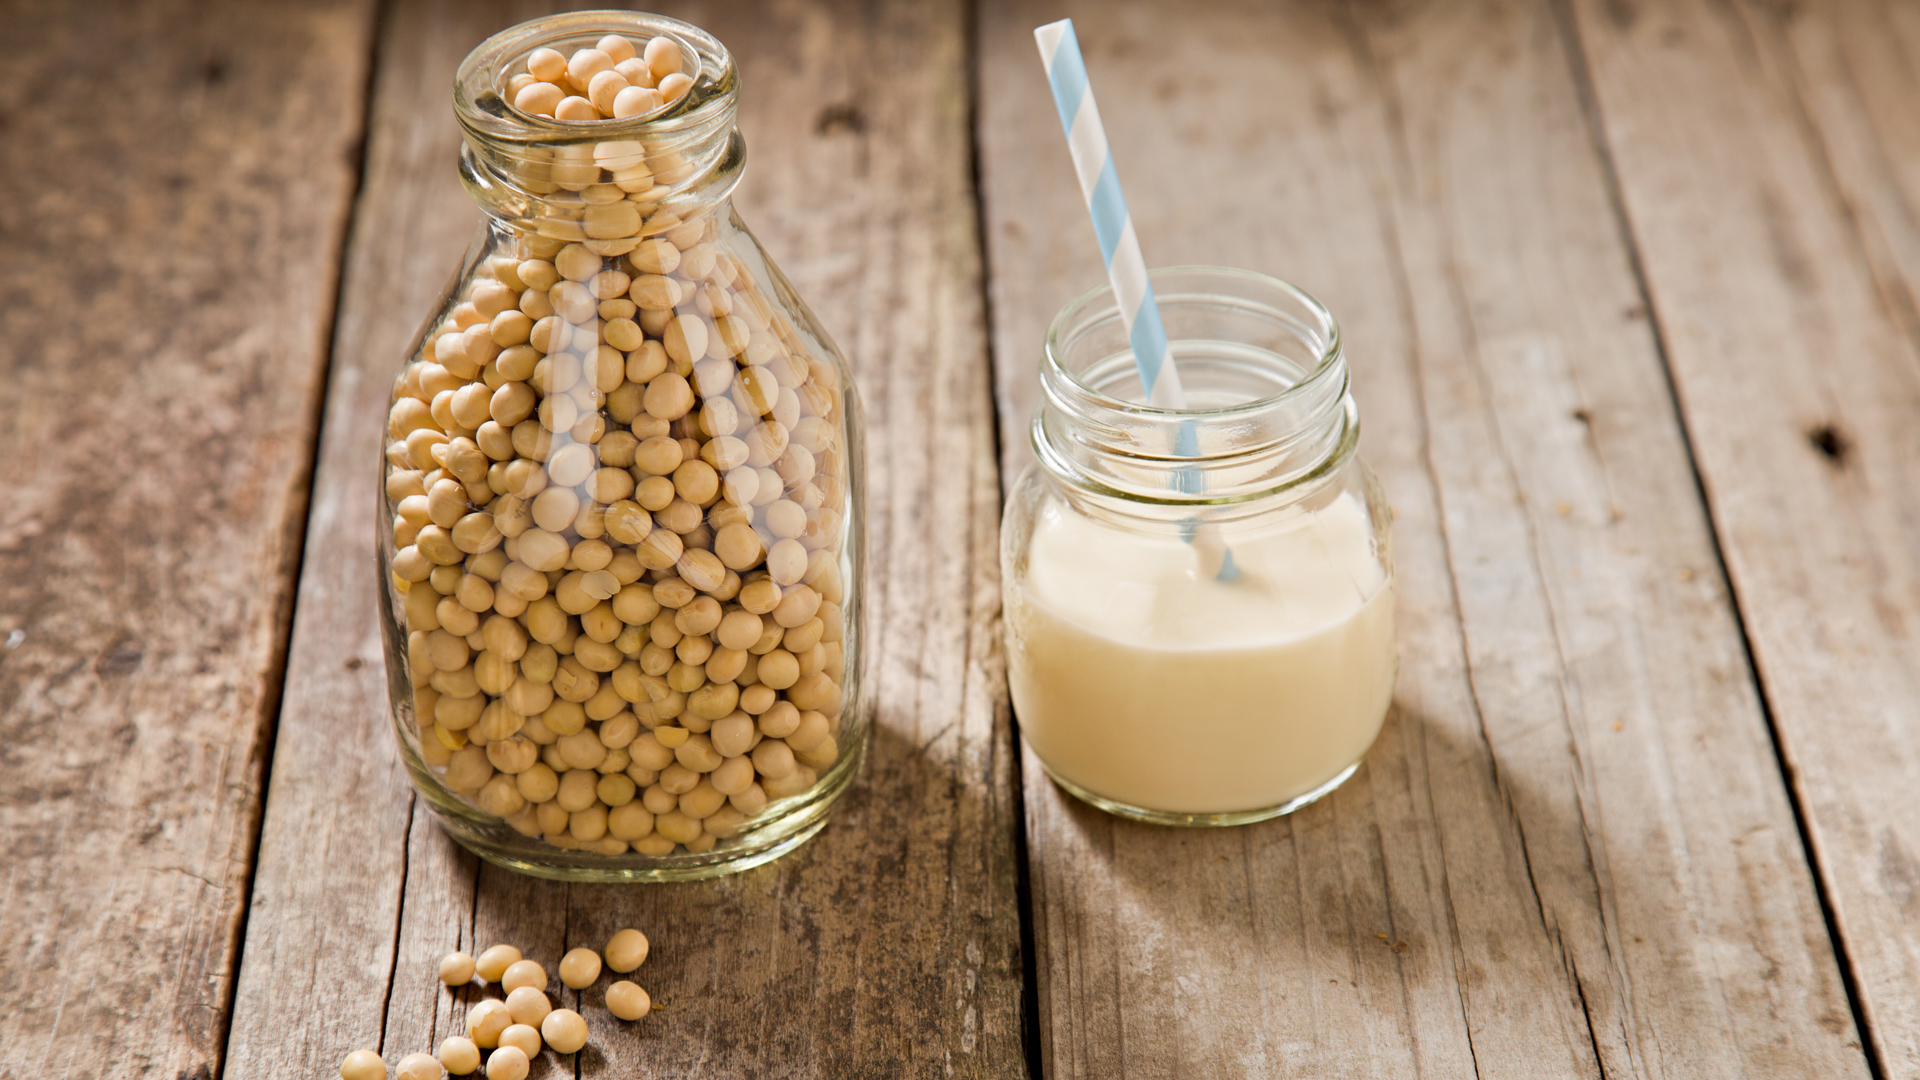 image shows a glass of soy milk next to some soybeans